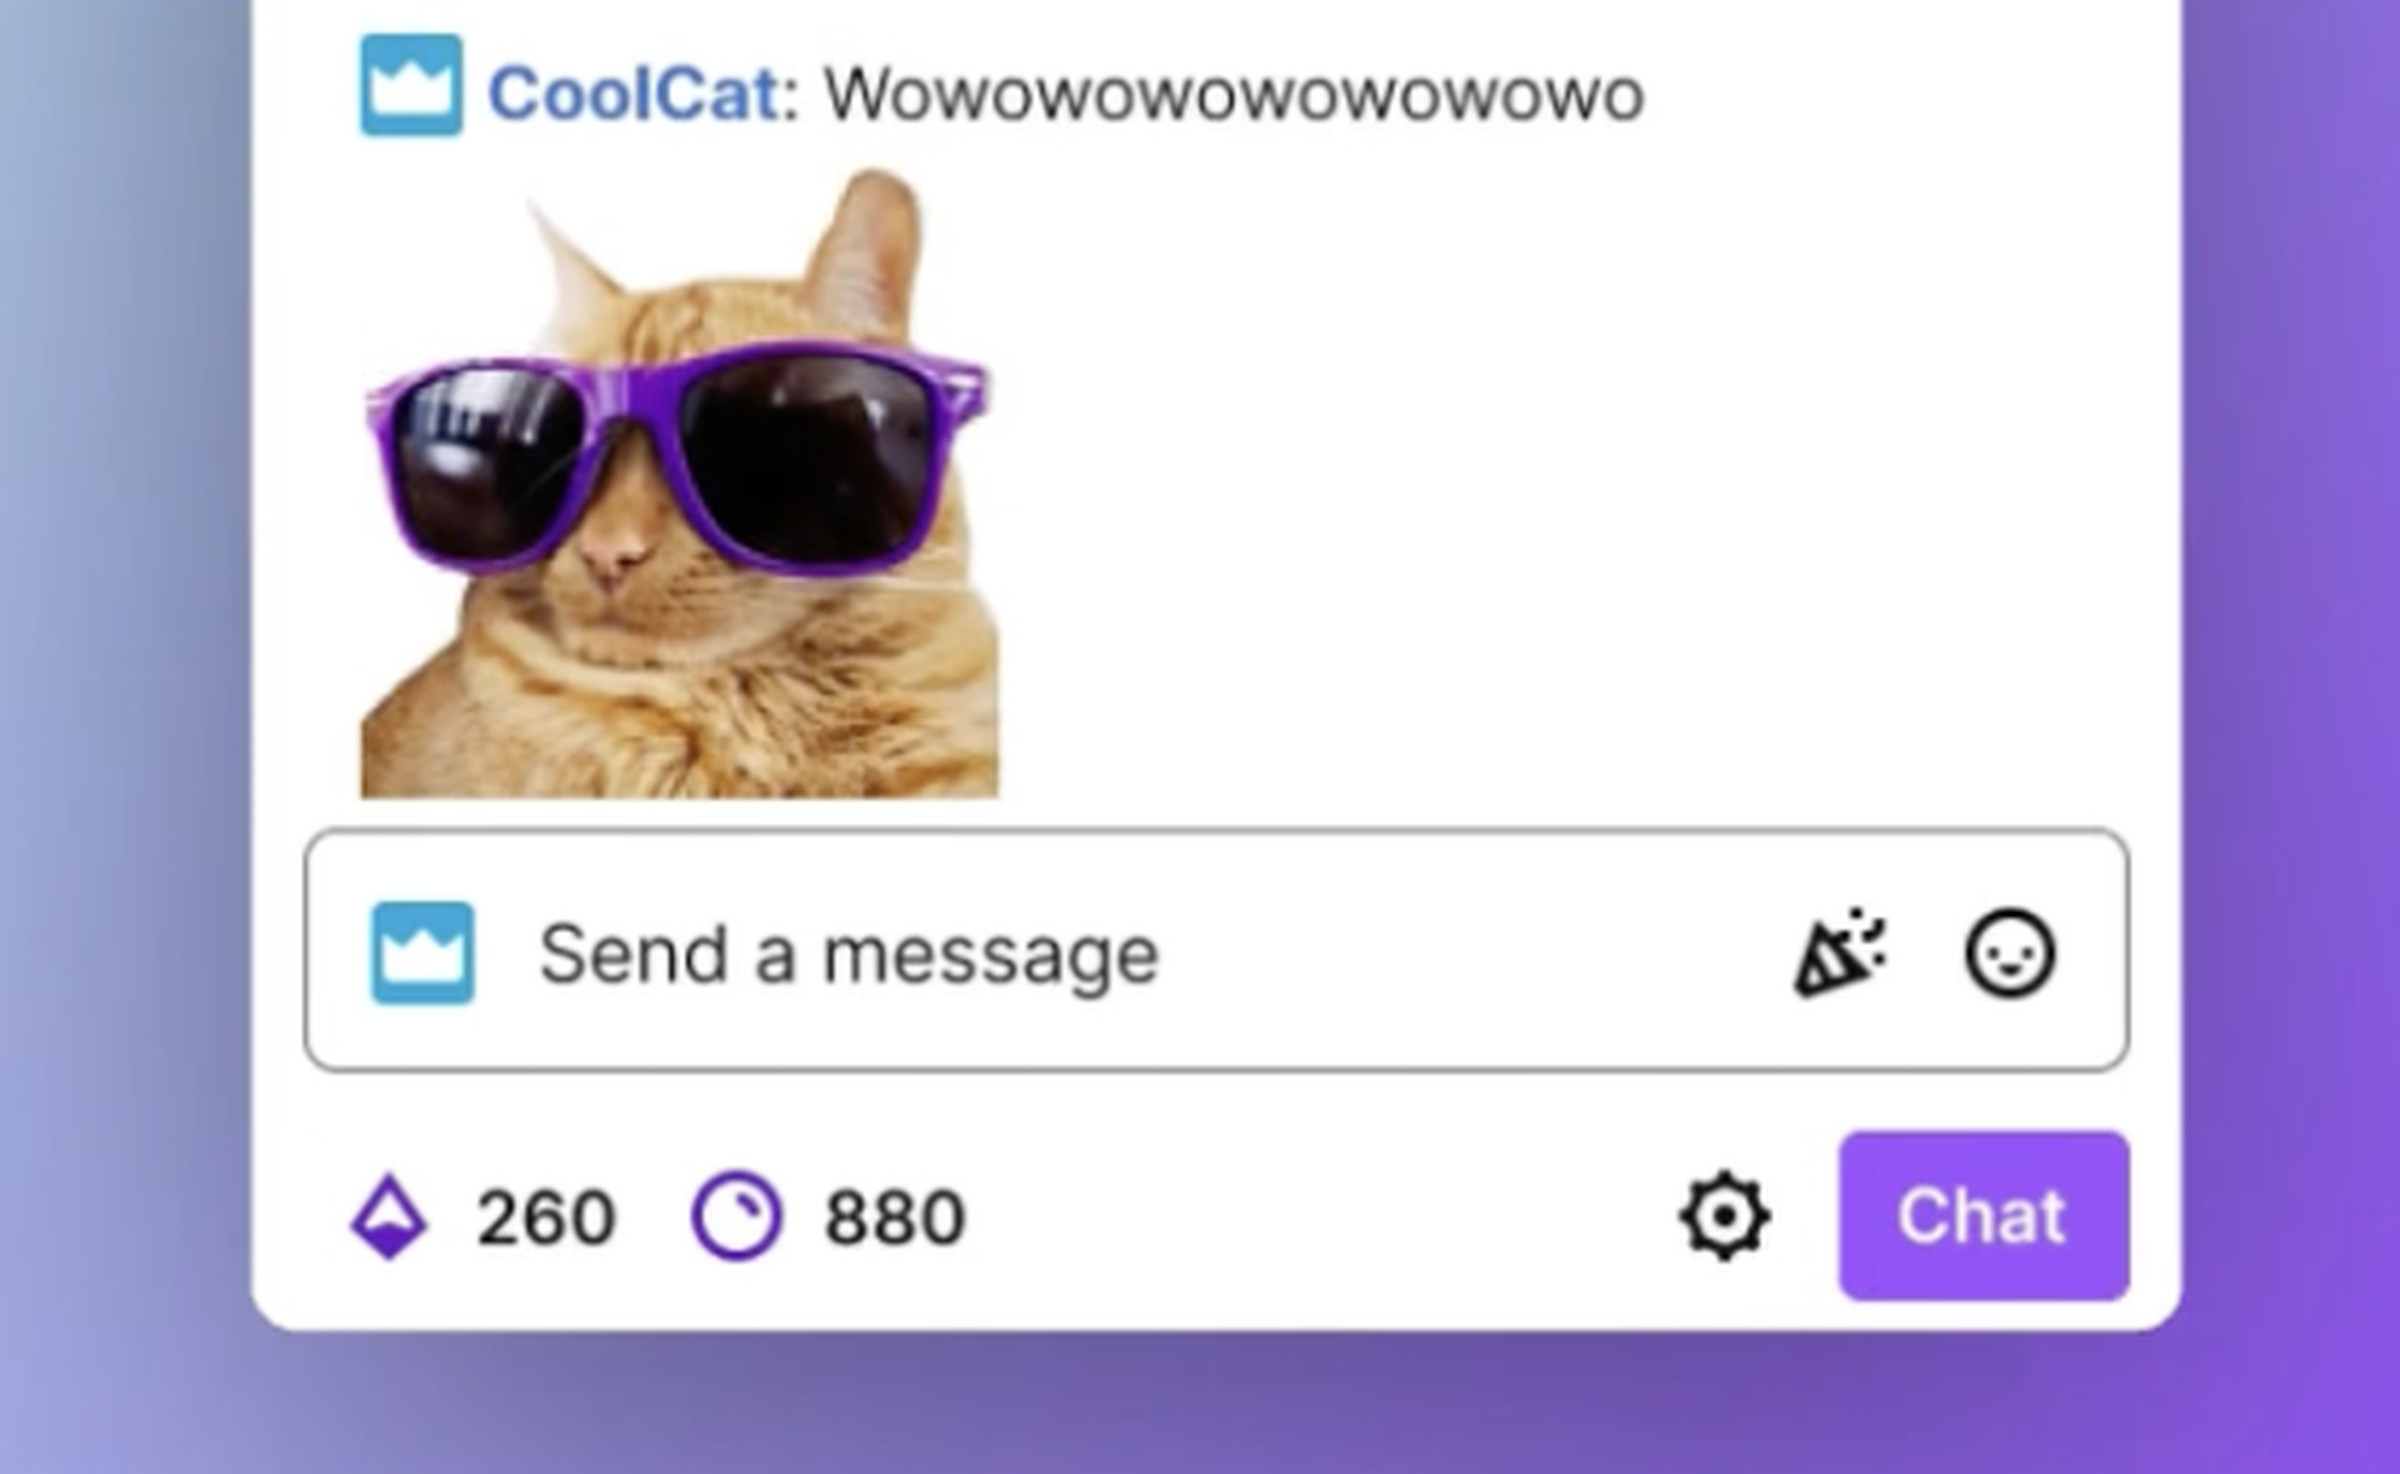 A screenshot of a Twitch chat showing a very large cat emote.